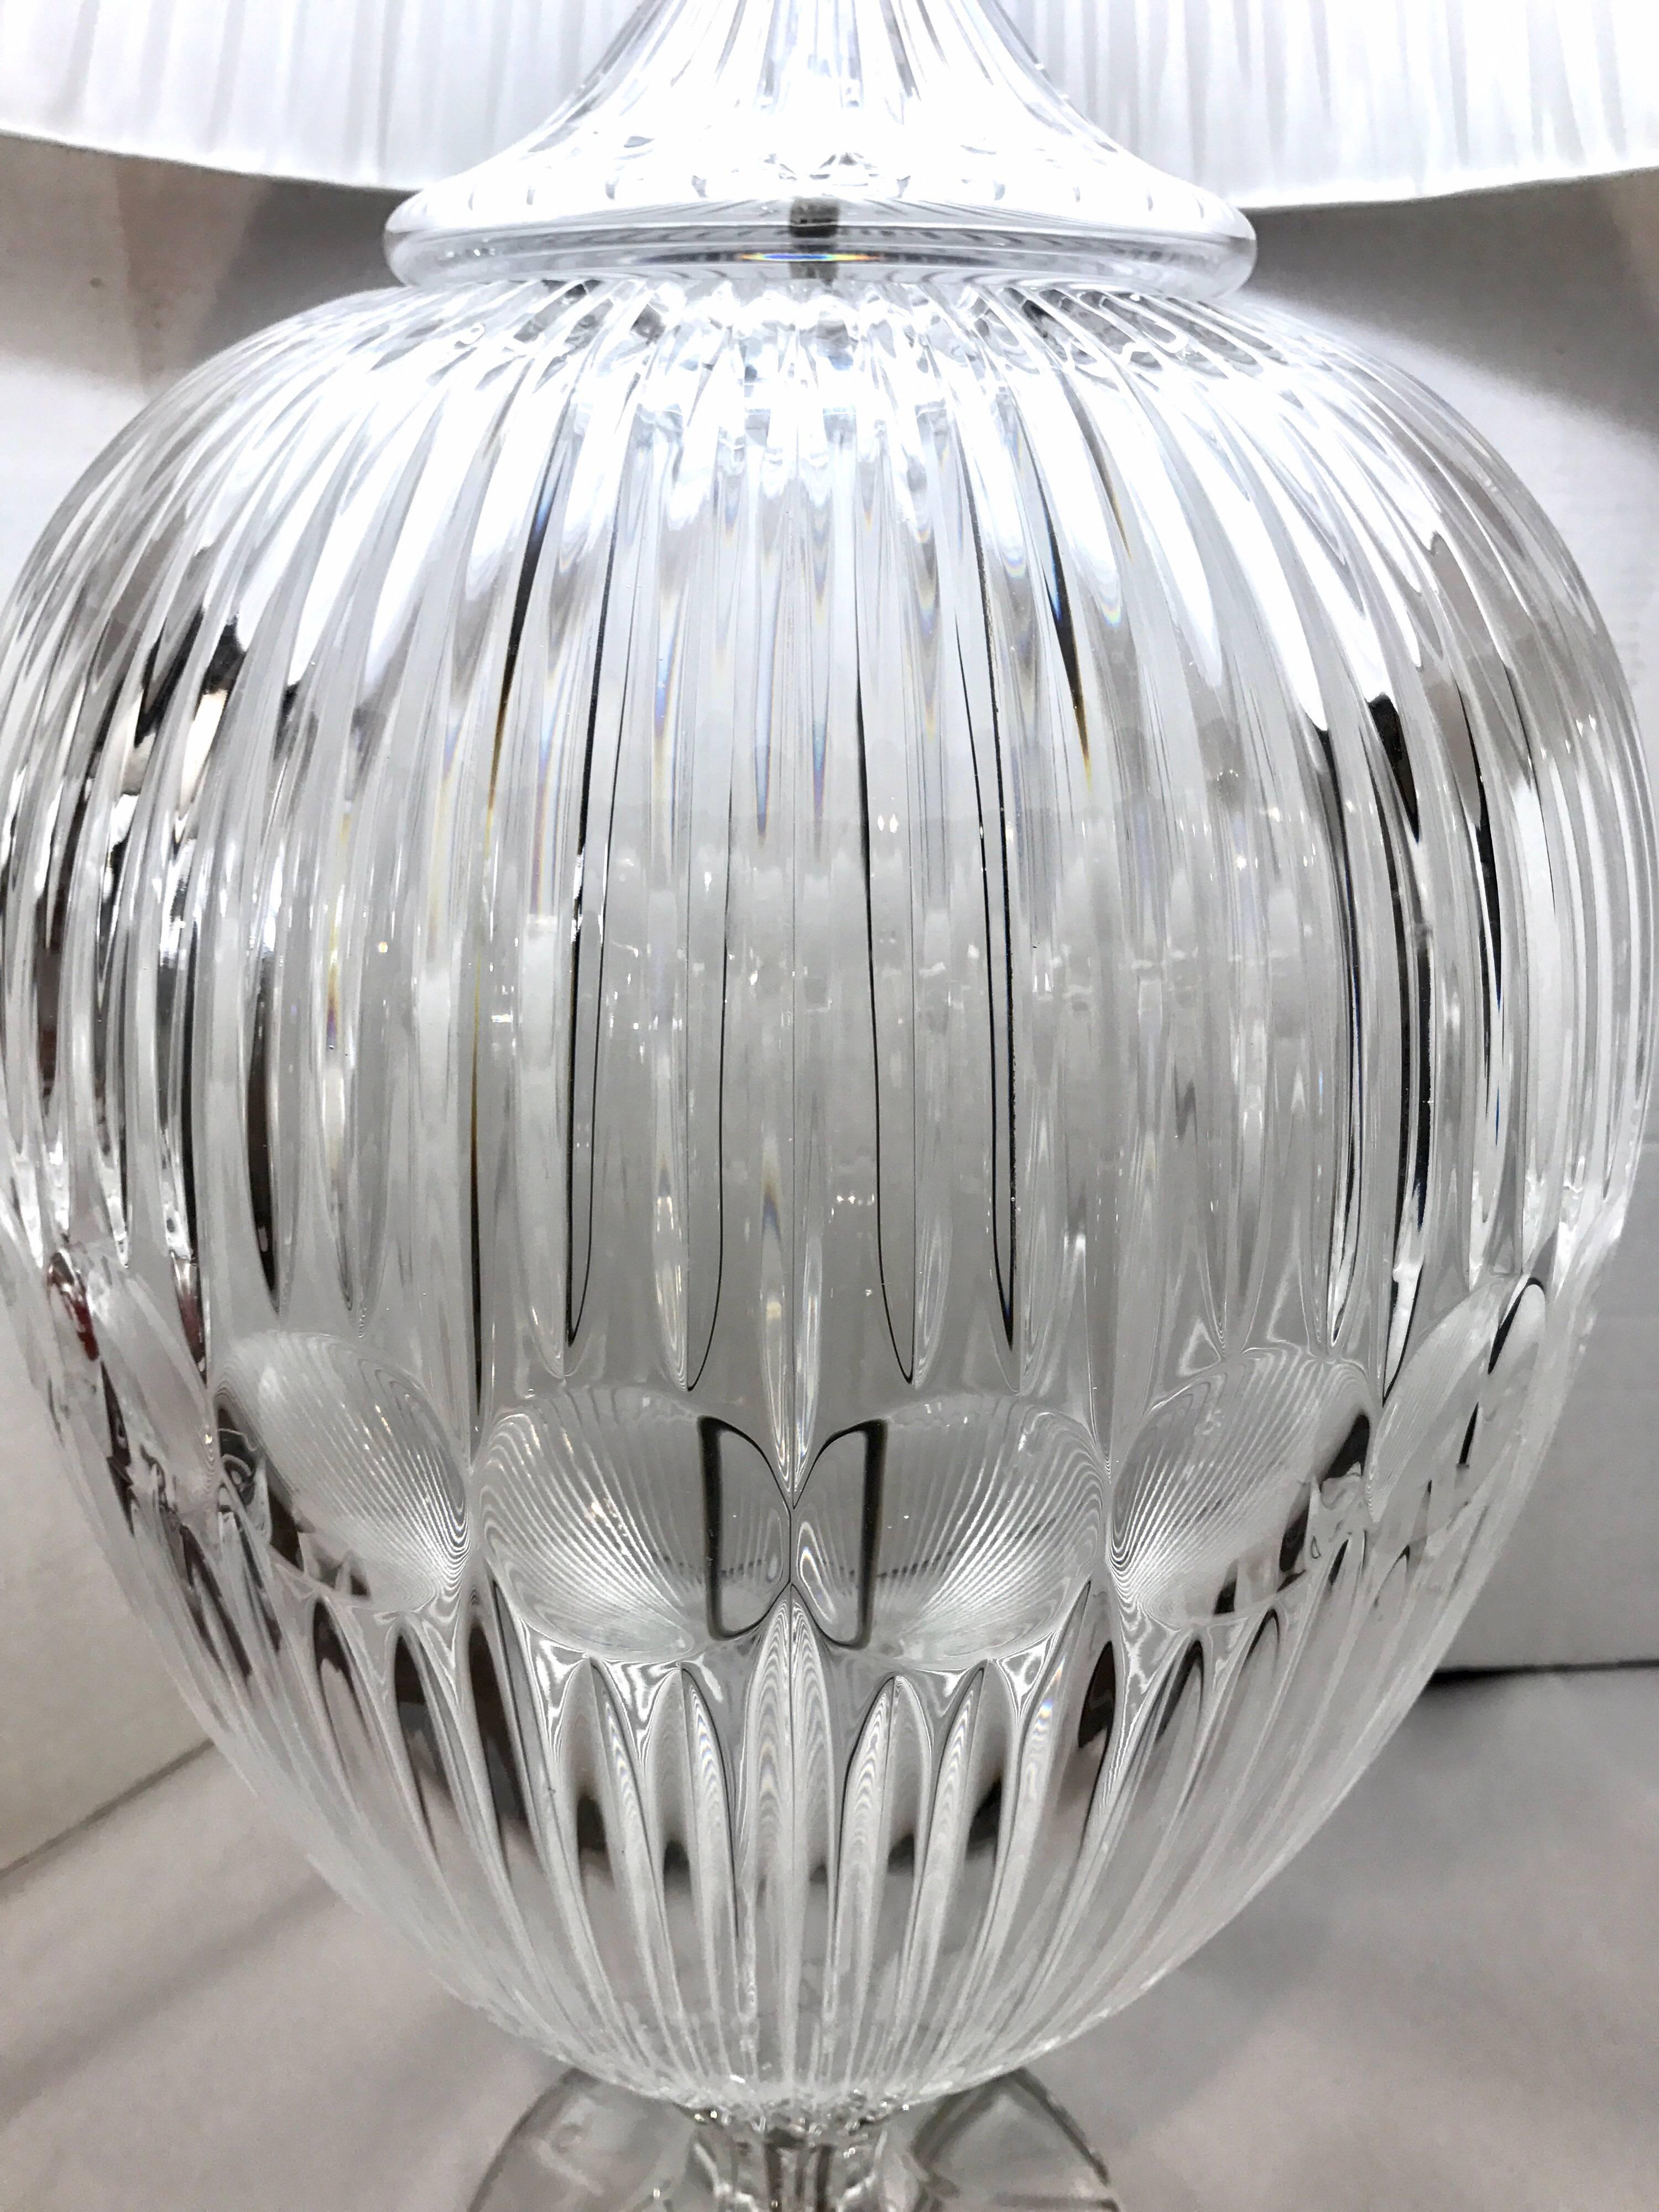 Stunning pair of heavy Italian crystal lamps. Pleated silk shades included and measure 14 inches wide x 39 inches high. What sets these lamps apart are their scale and gorgeous craftsmanship.